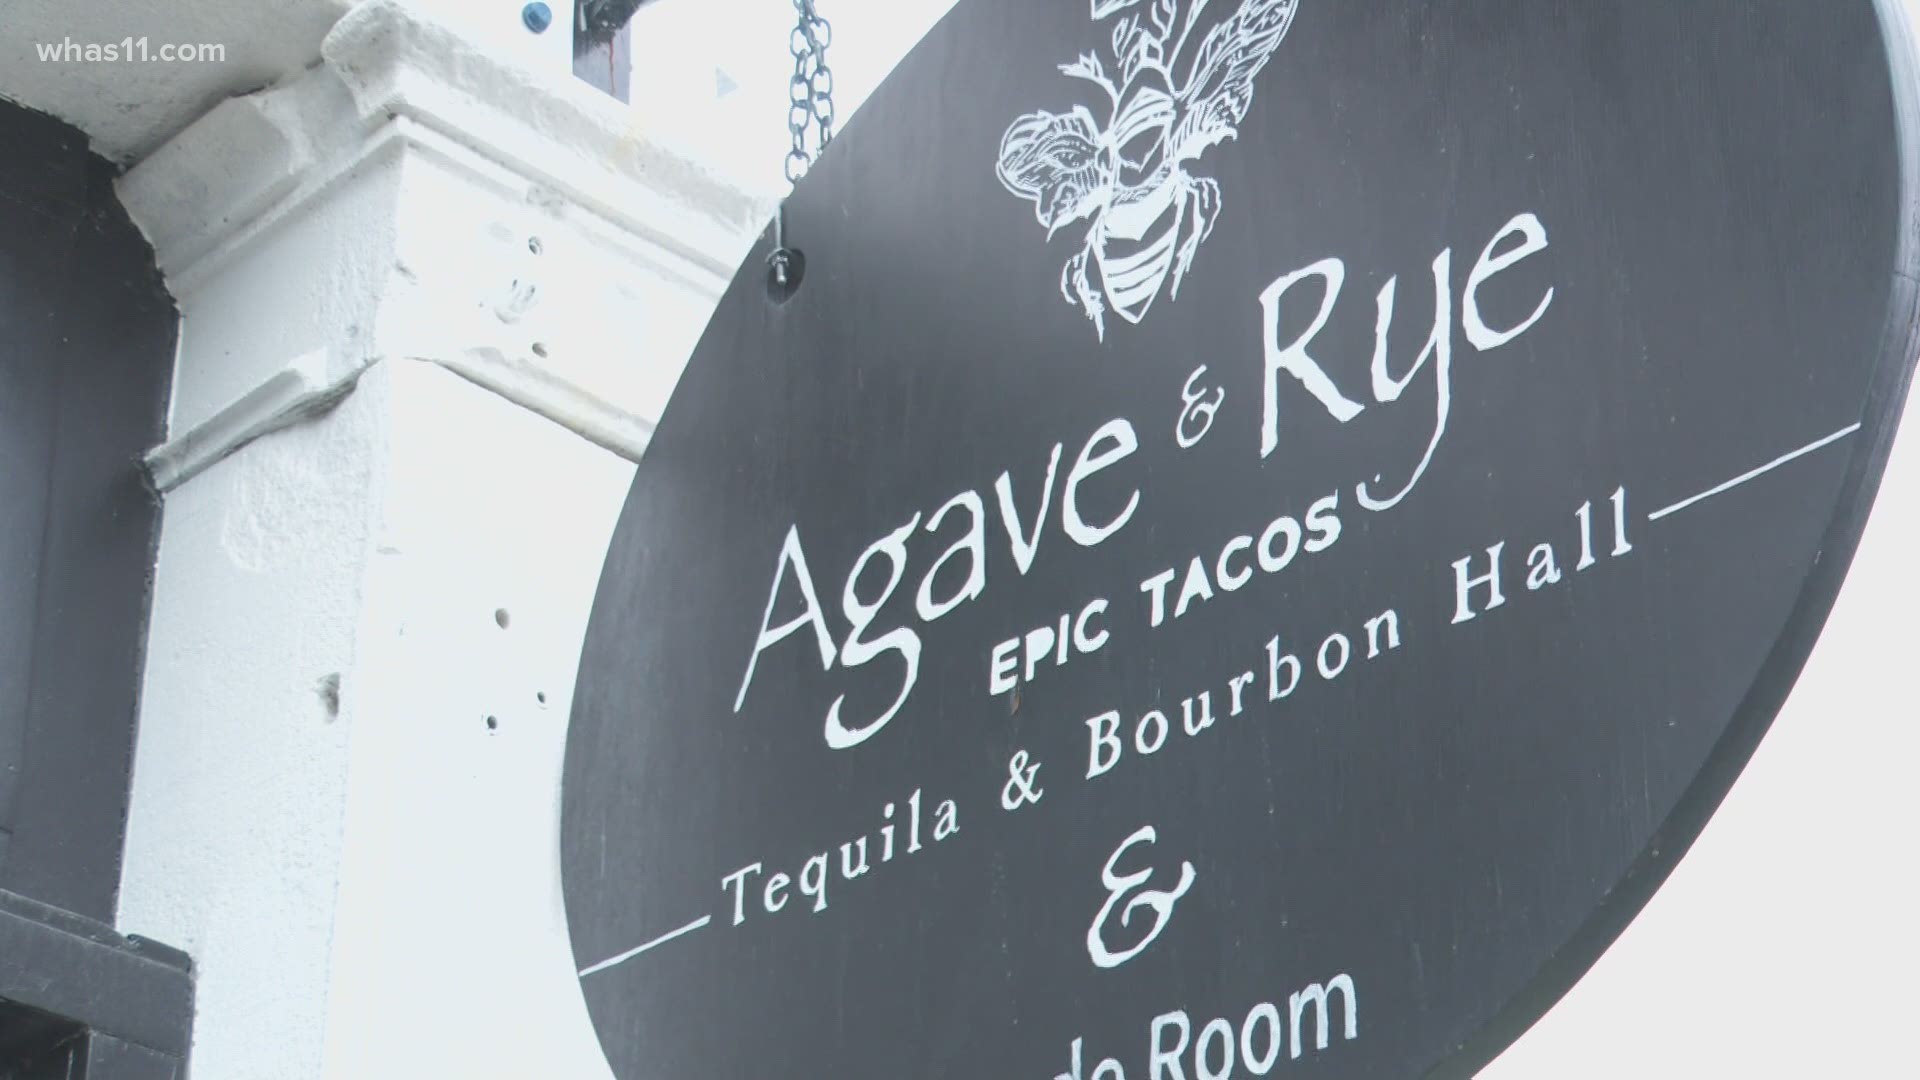 A Louisville hot spot known for tacos and tequila is taking the leap over the river and opening up in Indiana. Agave & Rye plans to open a restaurant in New Albany.